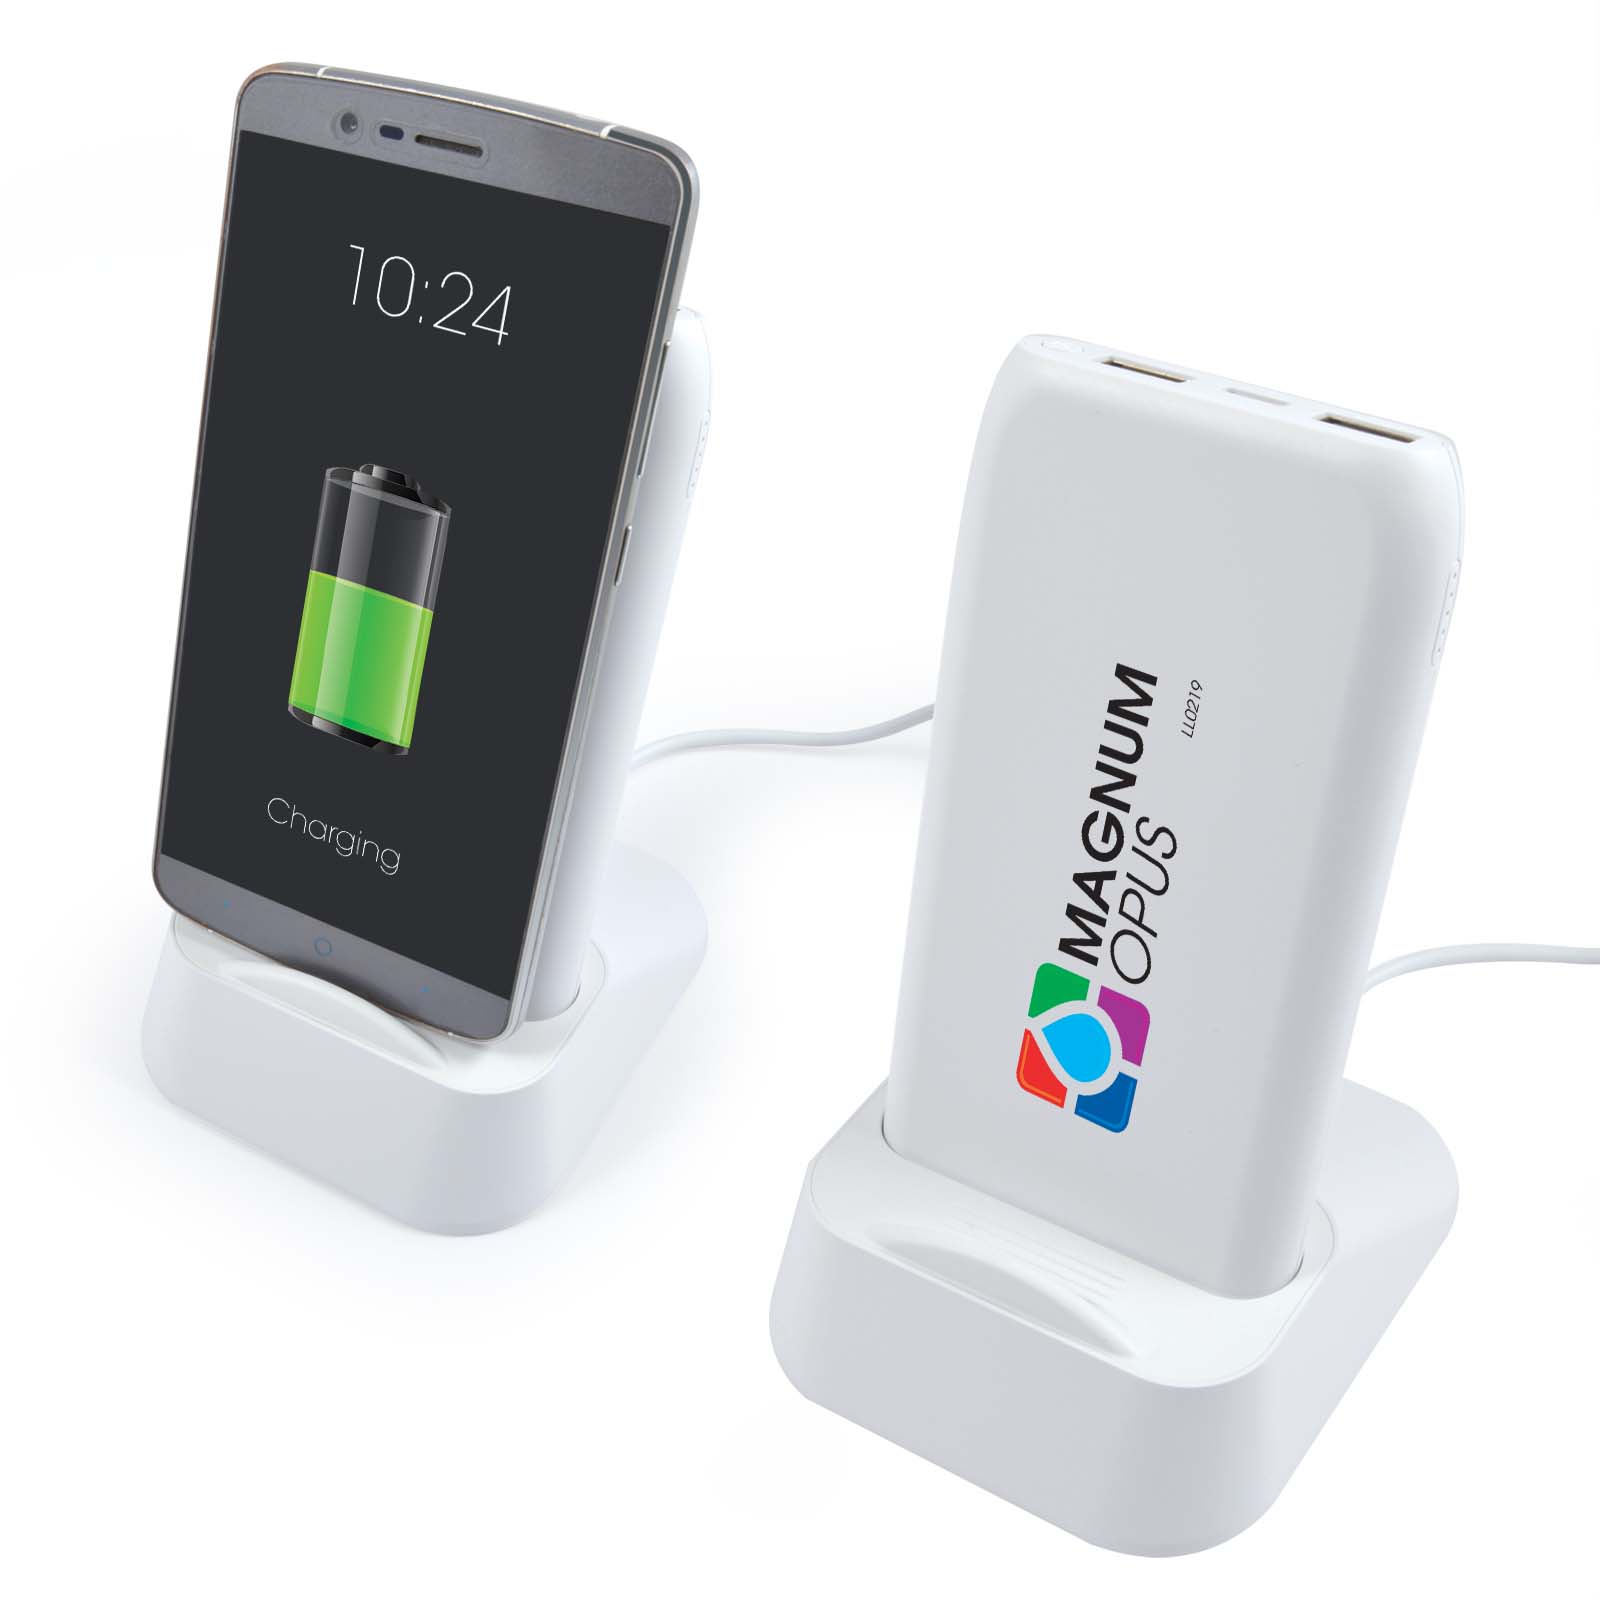 LL4 Proton Wireless Charger charger